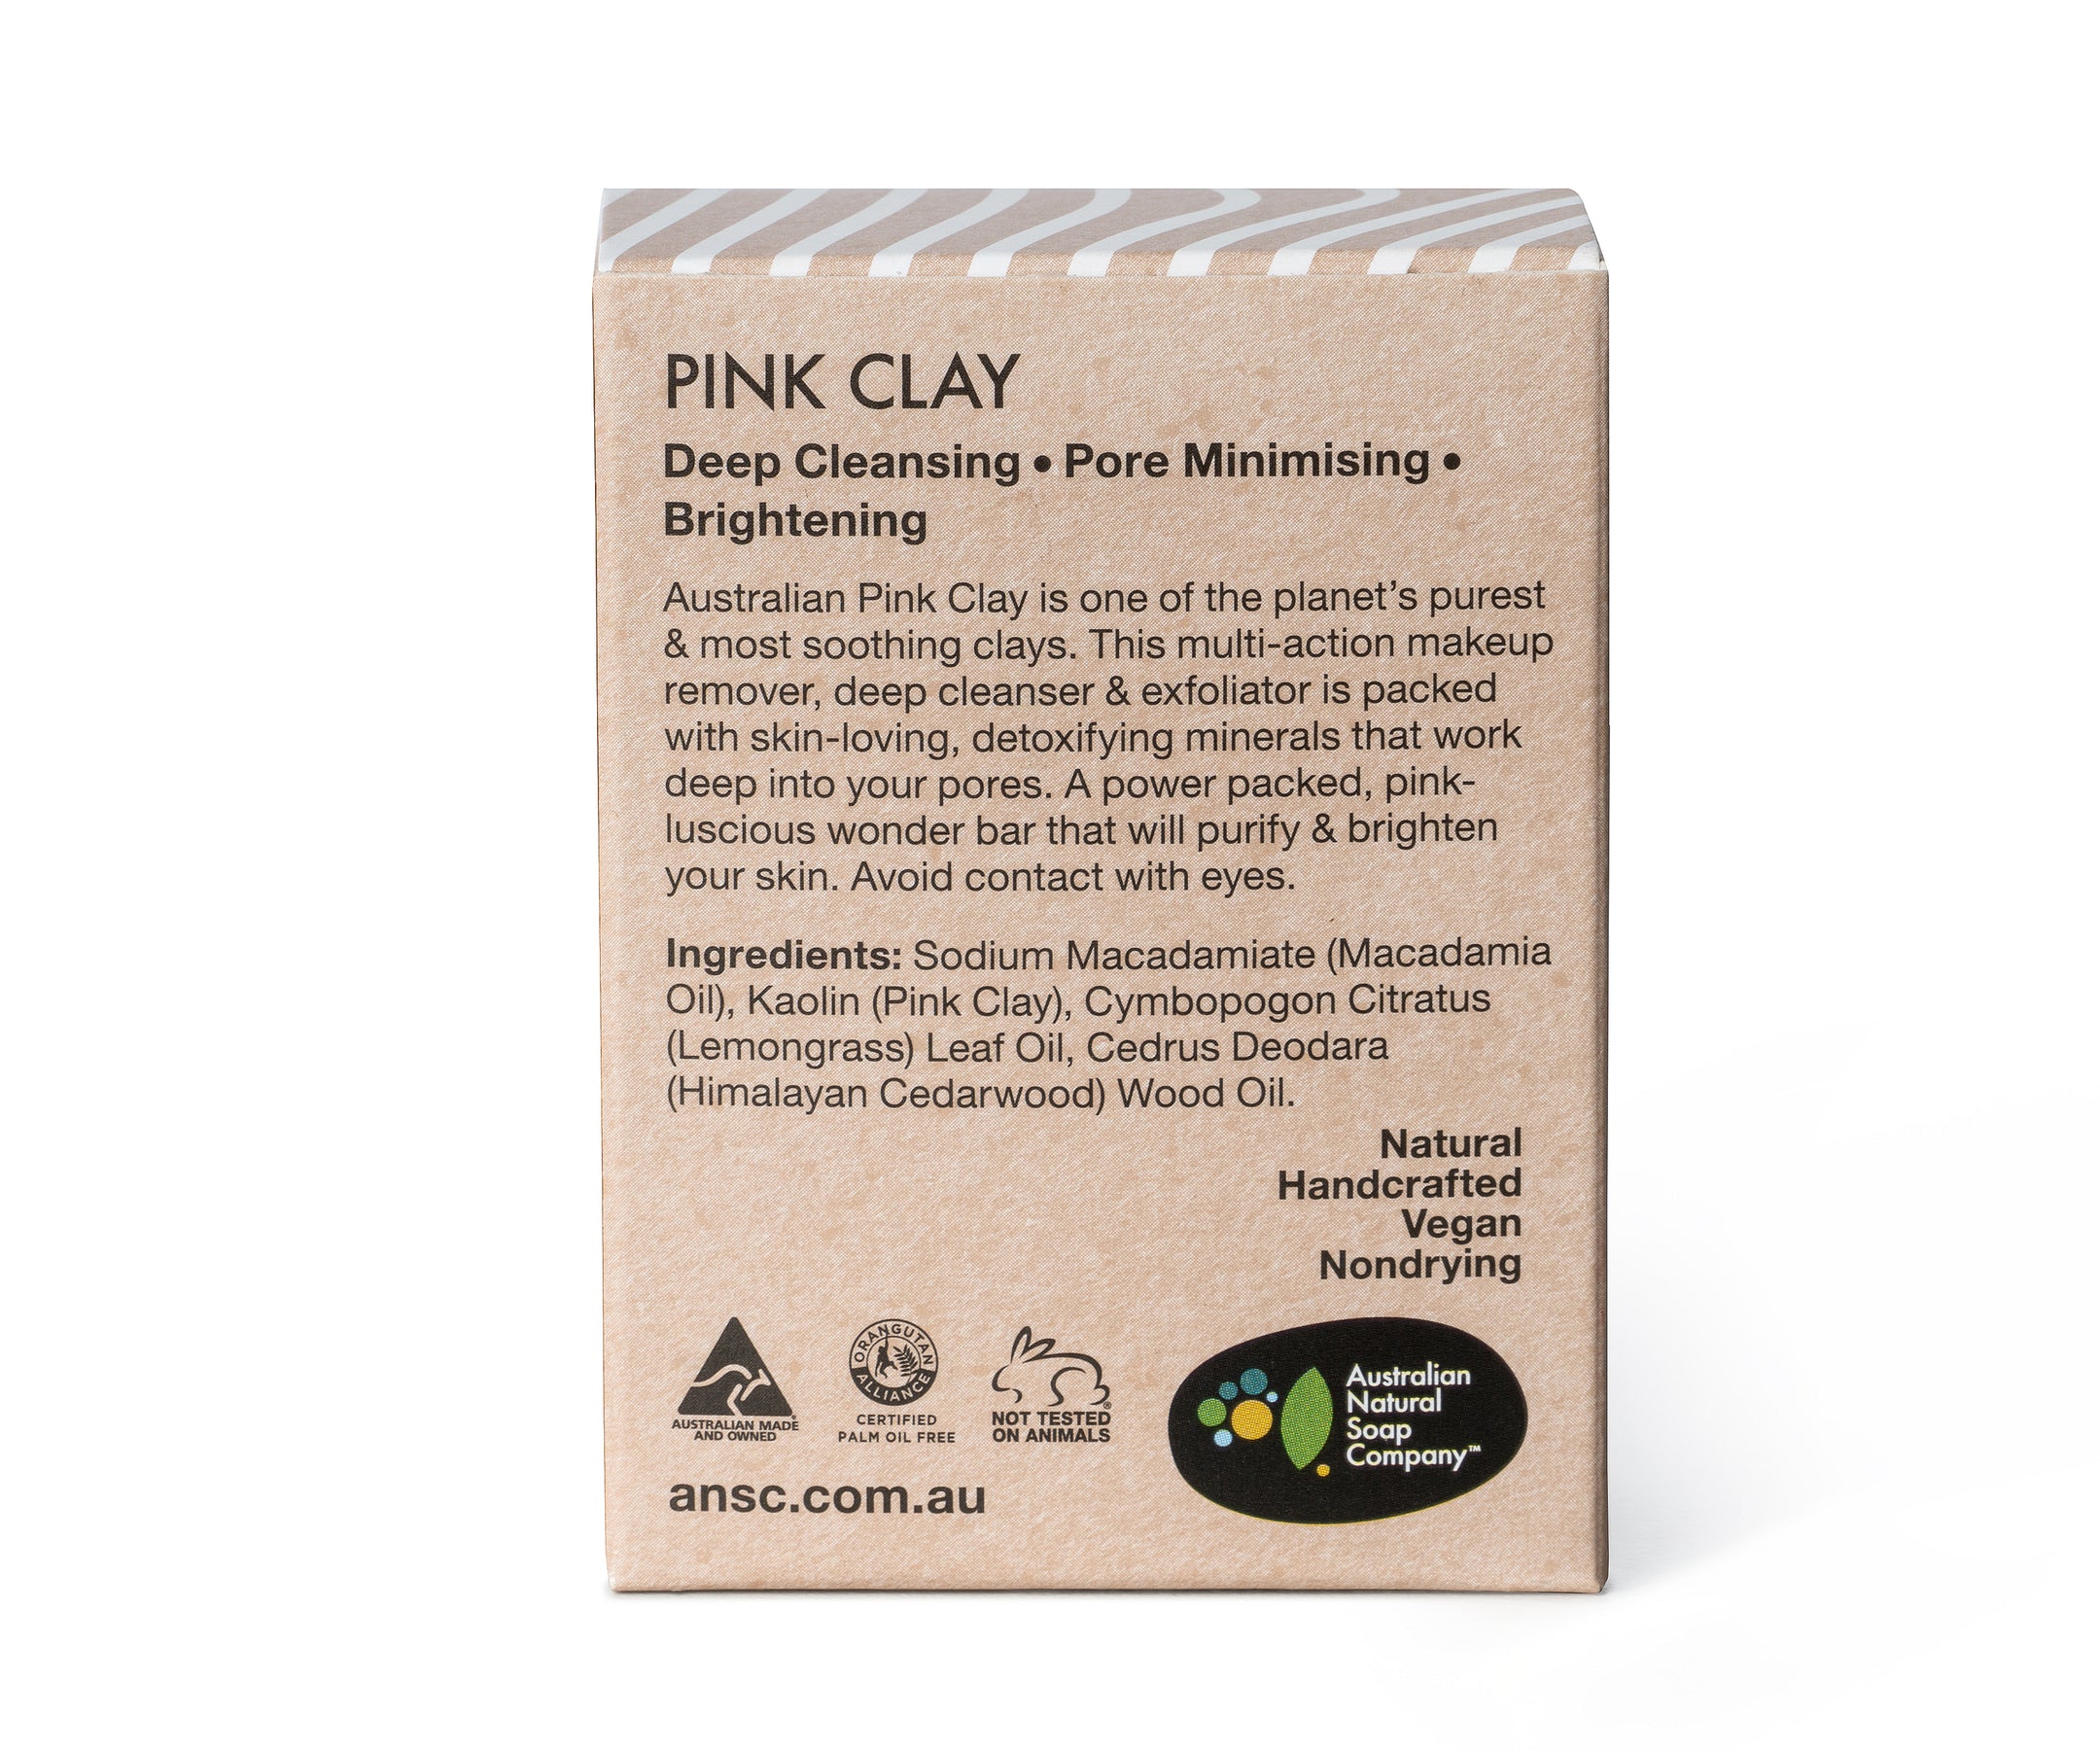 Australian Natural Soap Company Pink Clay Face and Body Cleansing Bar Back of Box